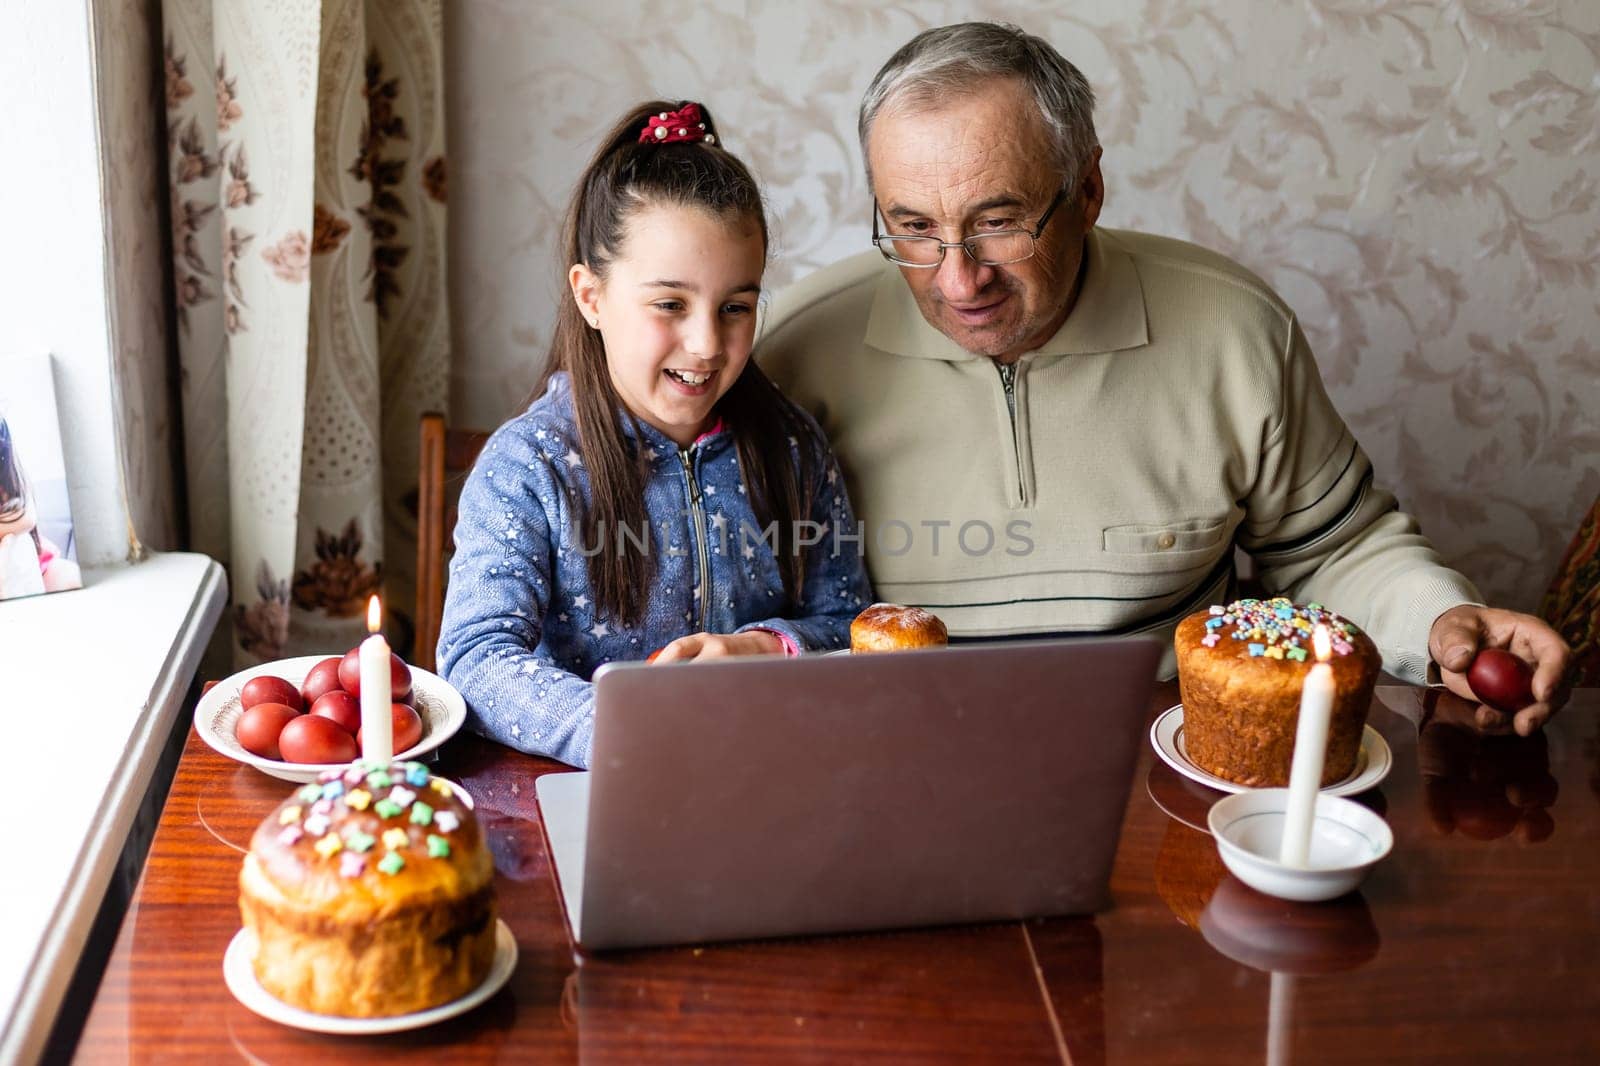 grandfather and granddaughter are talking via video link to their friends. Decorated table with colorful eggs and cake. Chatting during the COVID pandemic and the Easter holidays.